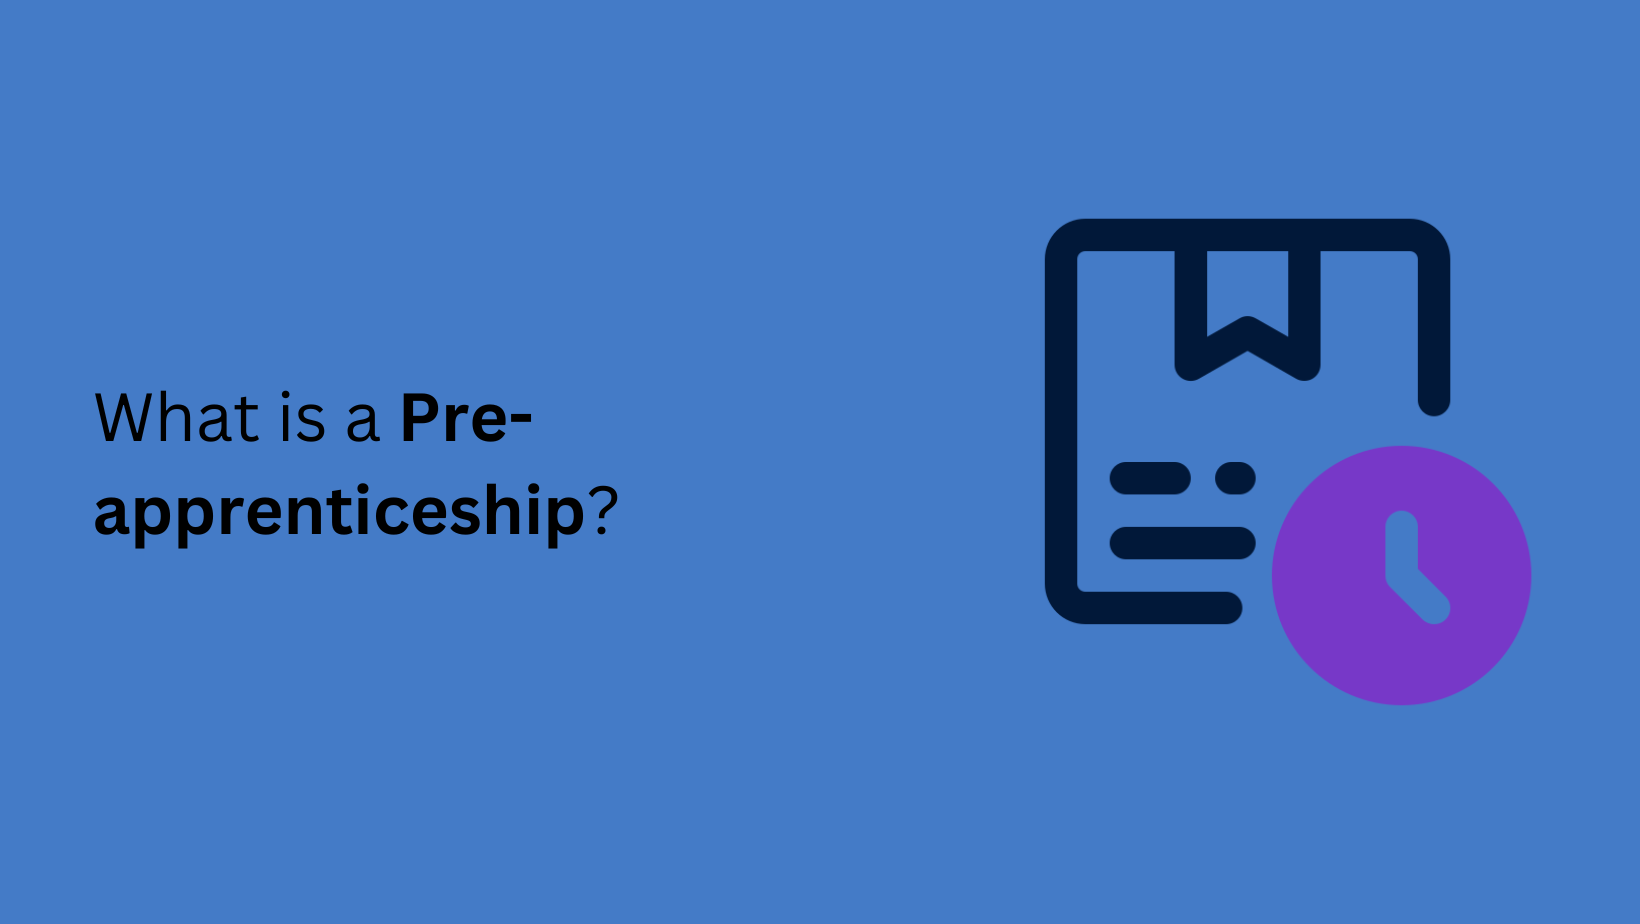 What is a Pre-apprenticeship